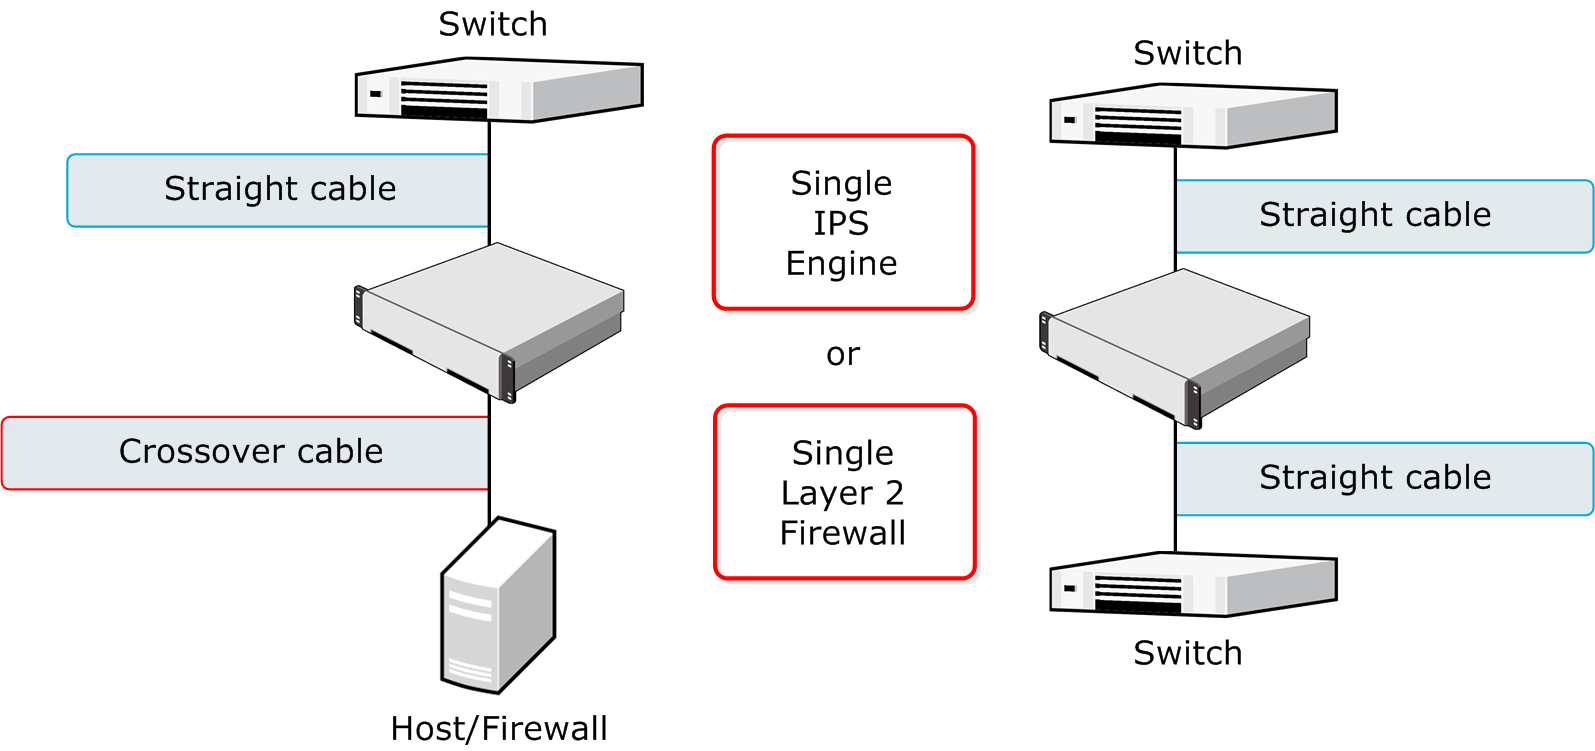 Cable connection guidelines for IPS and Layer 2 Firewalls